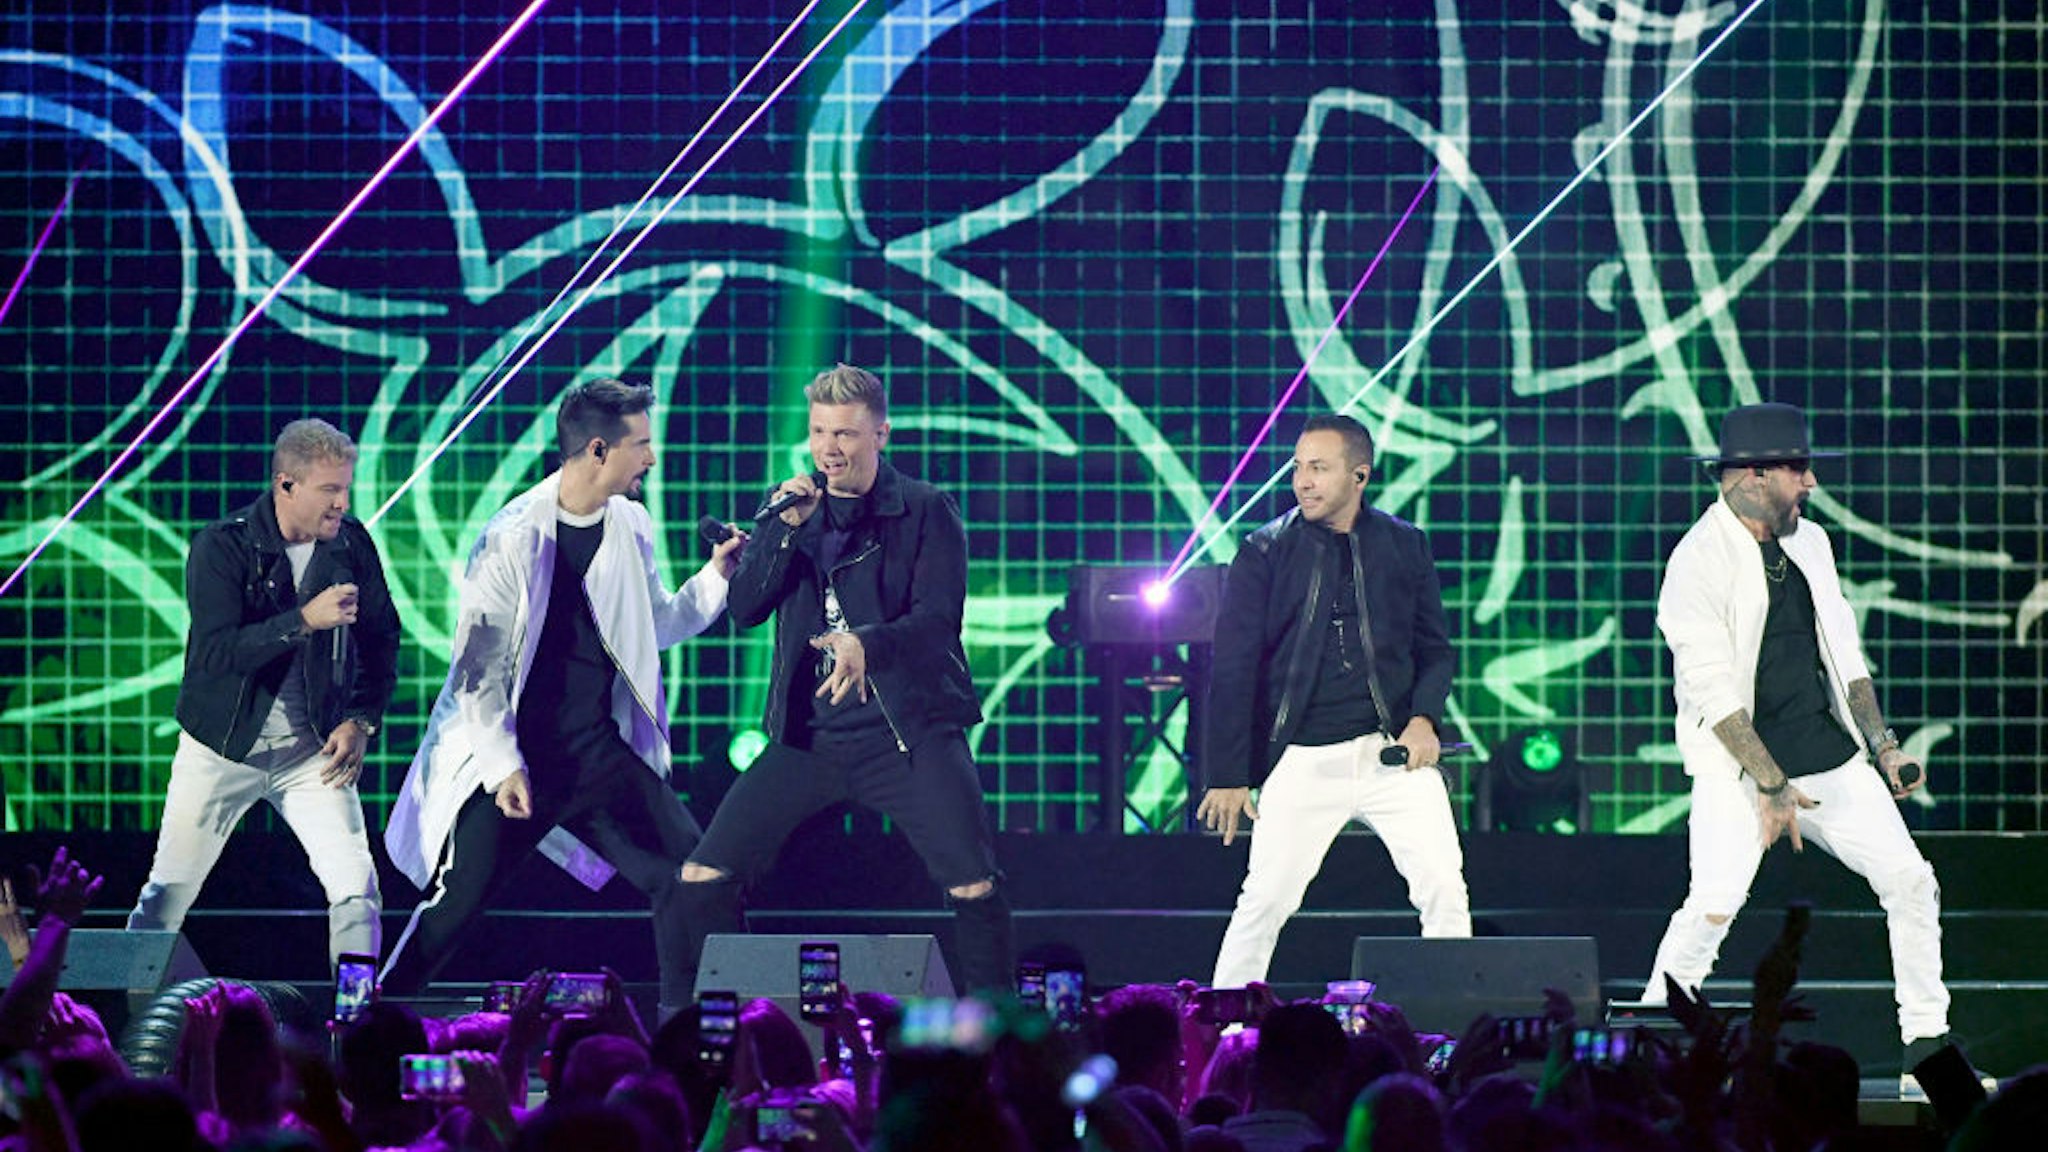 LAS VEGAS, NEVADA - SEPTEMBER 20: (L-R) Singers Brian Littrell, Kevin Richardson, Nick Carter, Howie Dorough and AJ McLean of the Backstreet Boys perform onstage during the 2019 iHeartRadio Music Festival at T-Mobile Arena on September 20, 2019 in Las Vegas, Nevada. (Photo by Ethan Miller/Getty Images)